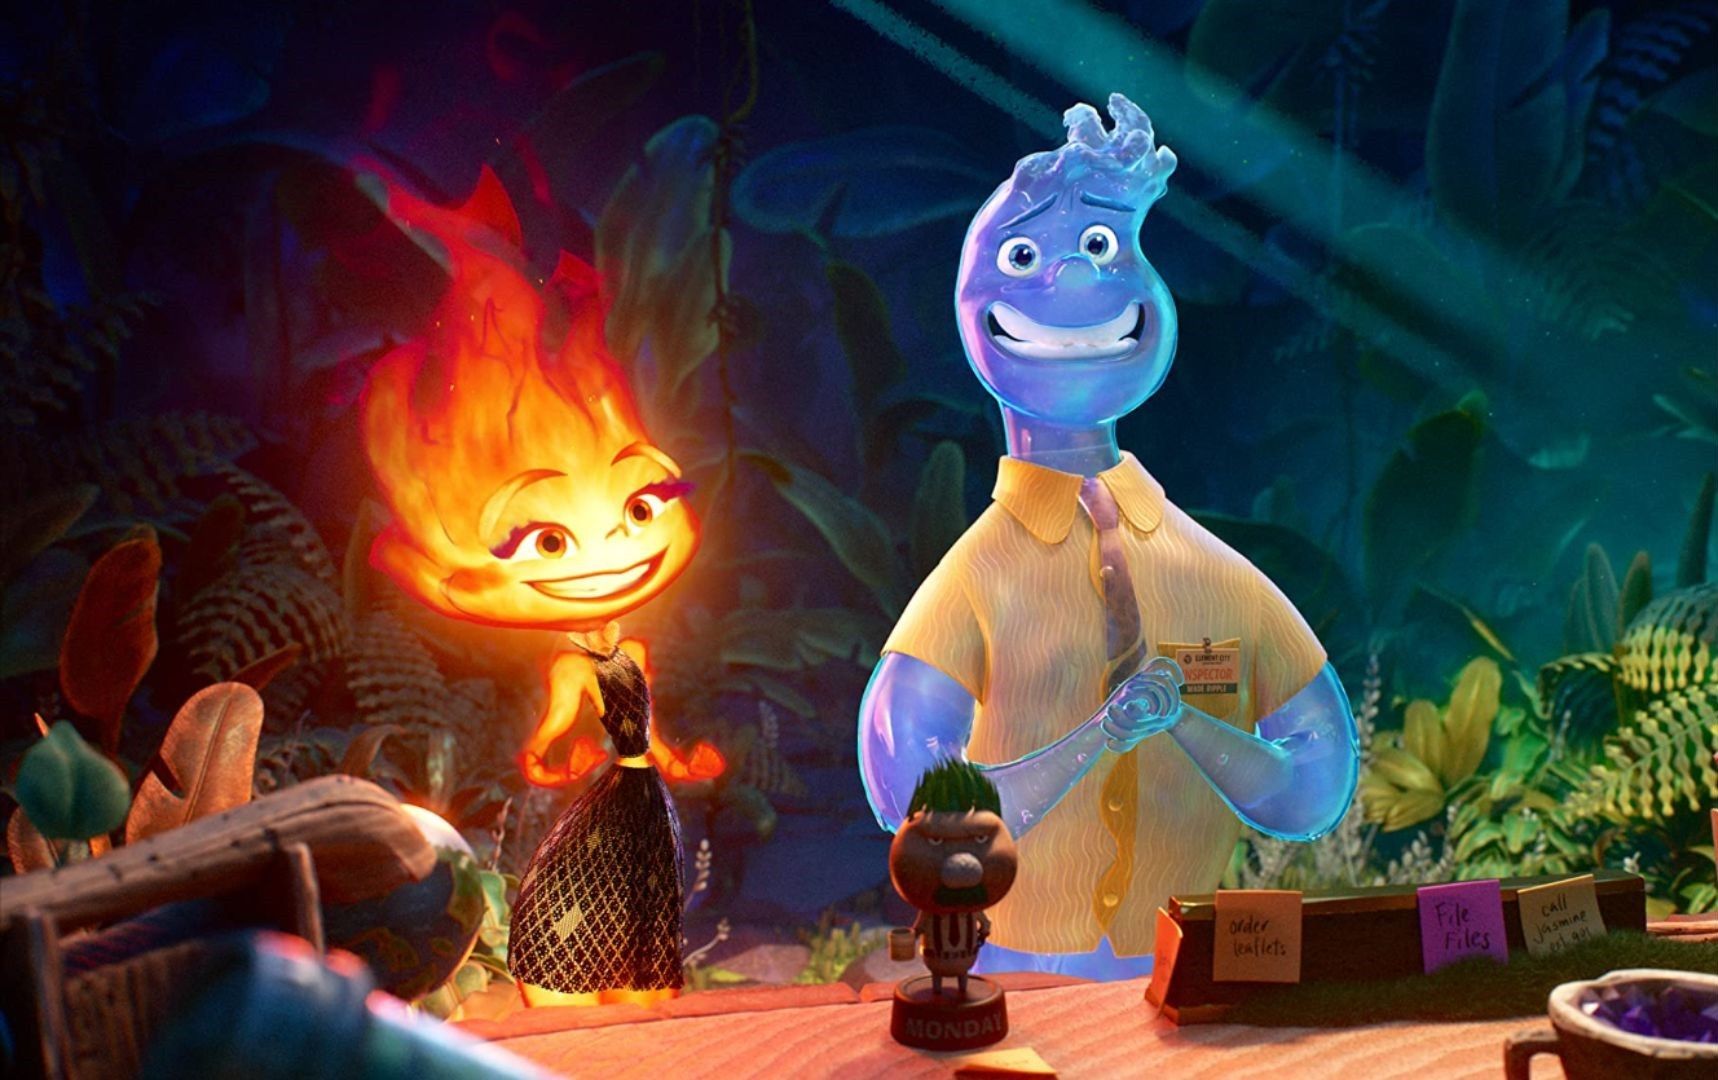 'Elemental' review: Filipino Ronnie del Carmen lends voice to new 'cute' Pixar production